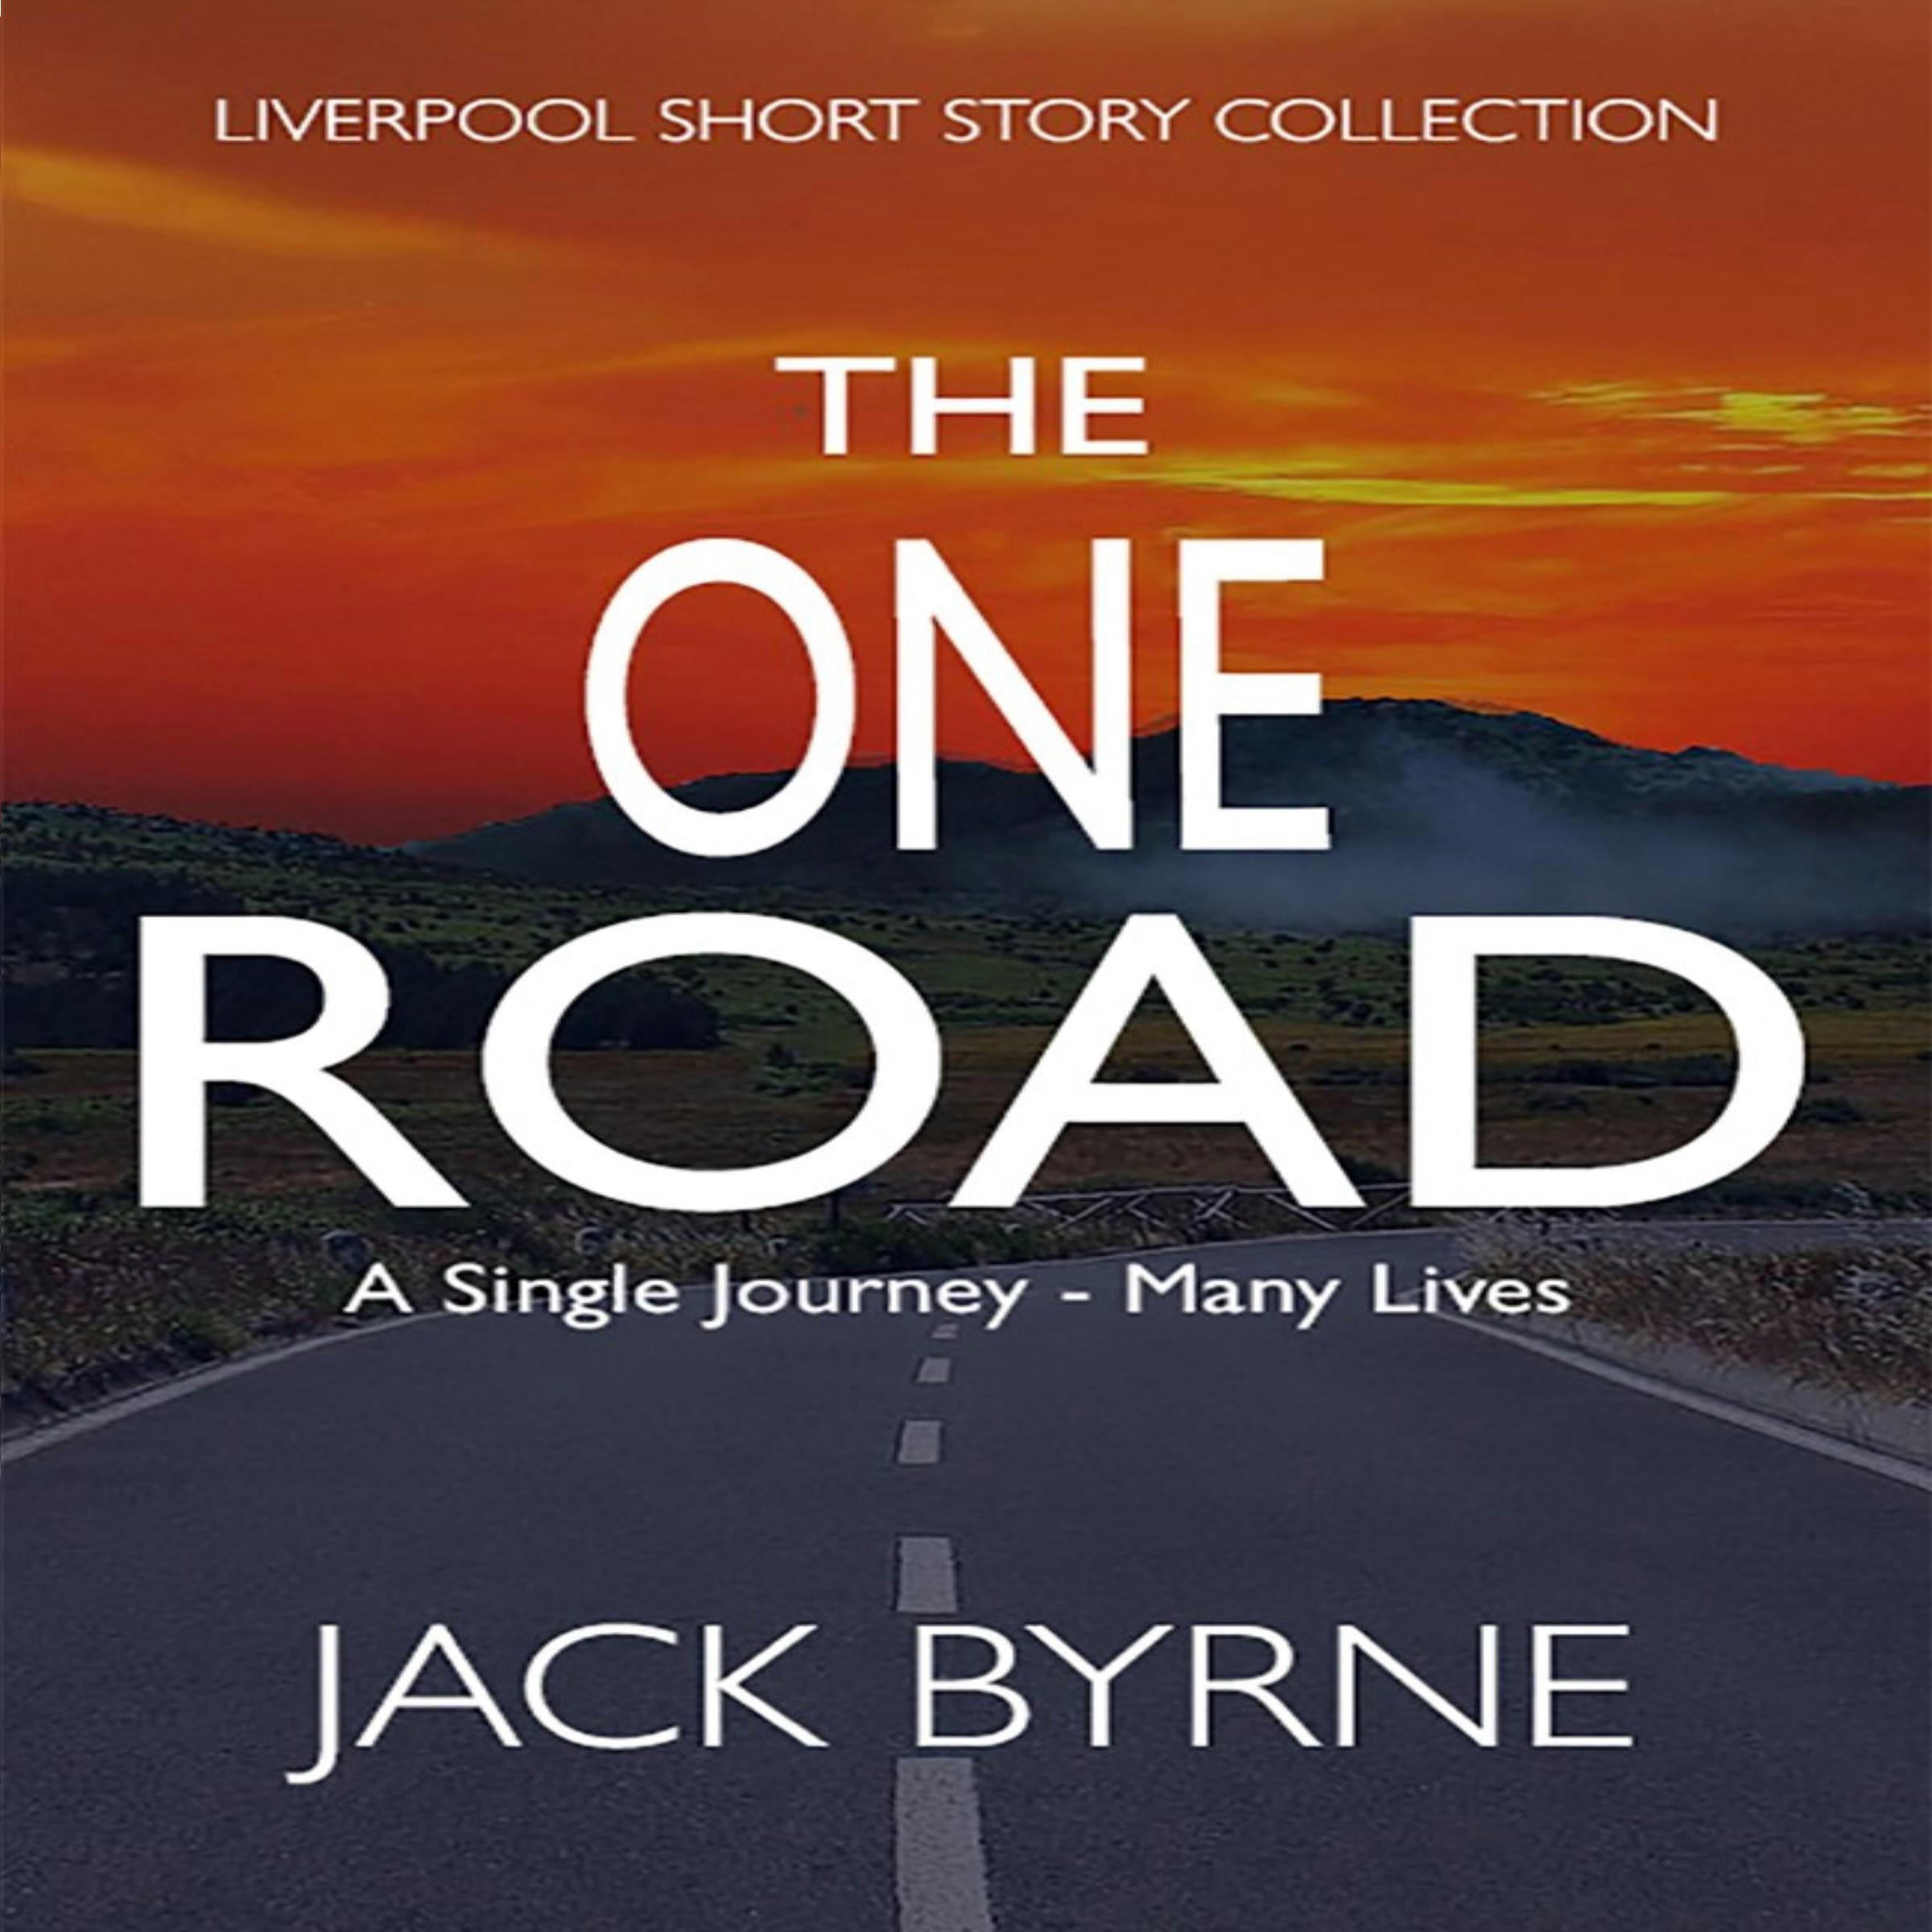 The One Road: A Single Journey - Many Lives, Liverpool Short Story Collection - Jack Byrne